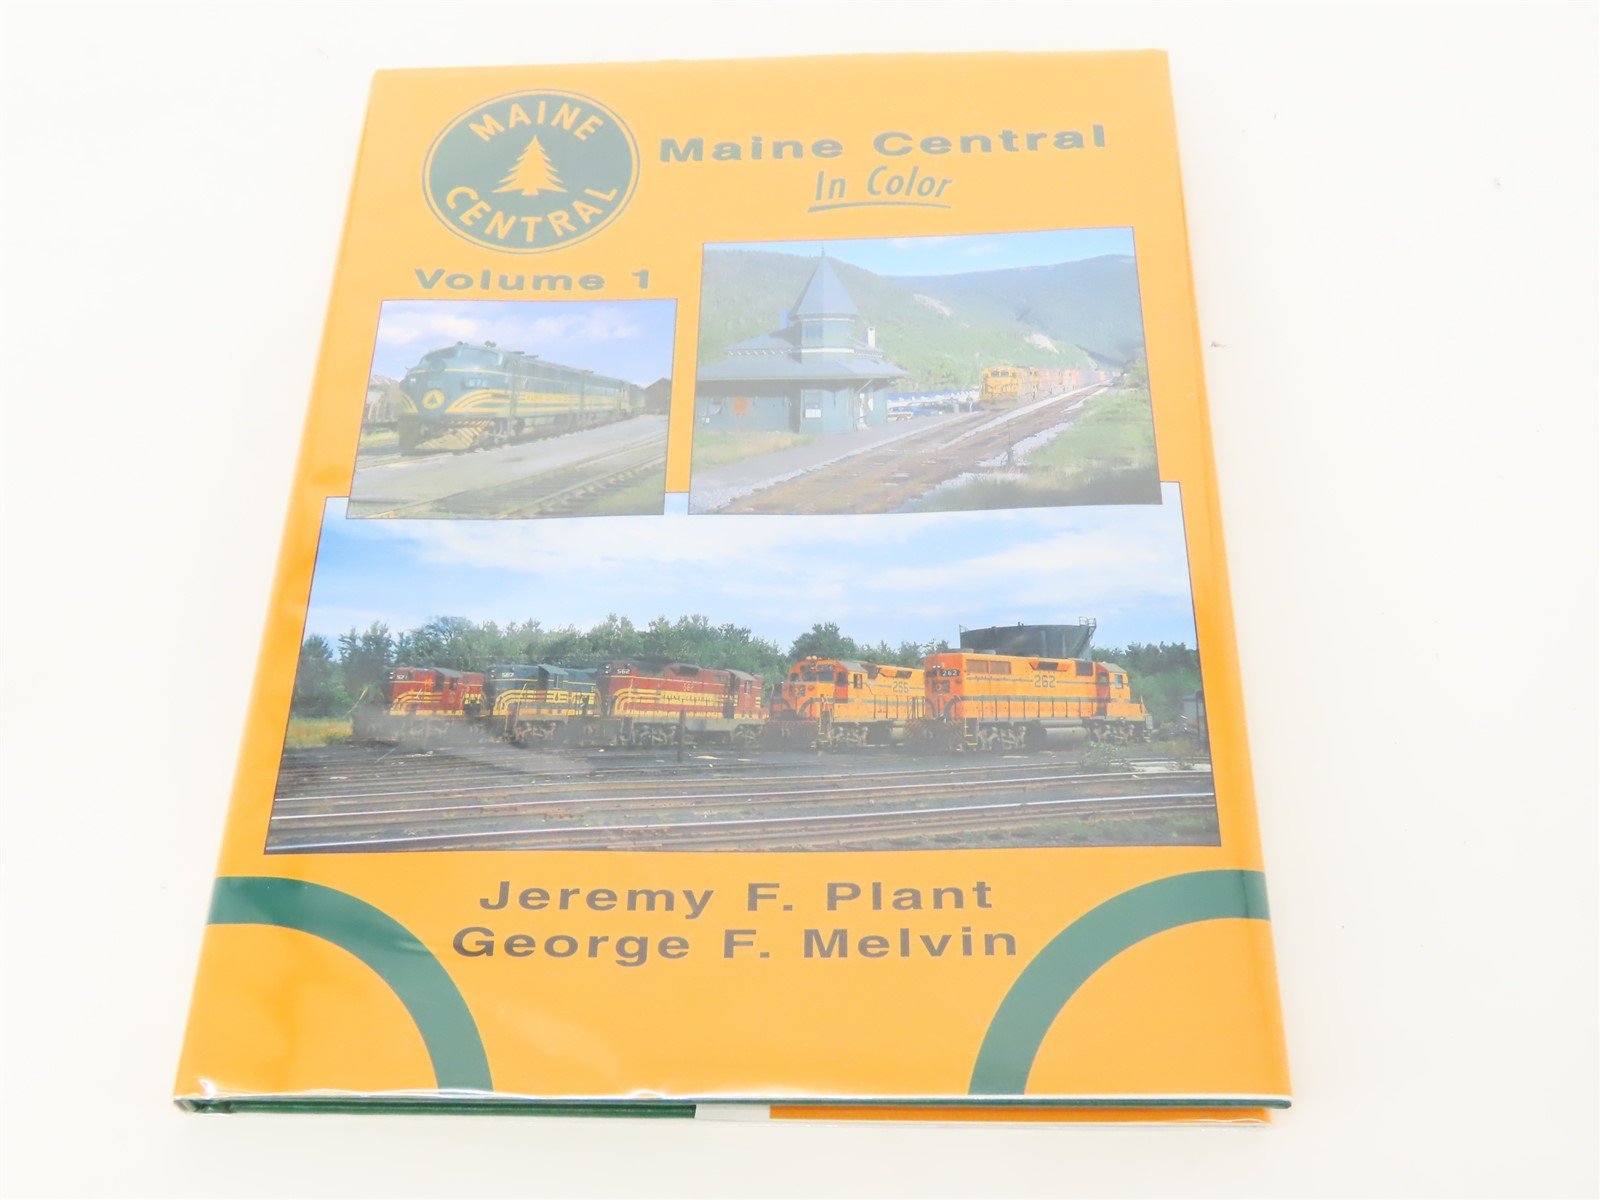 Morning Sun: Maine Central Volume 1 by George F. Melvin & Jeremy F. Plant ©1998